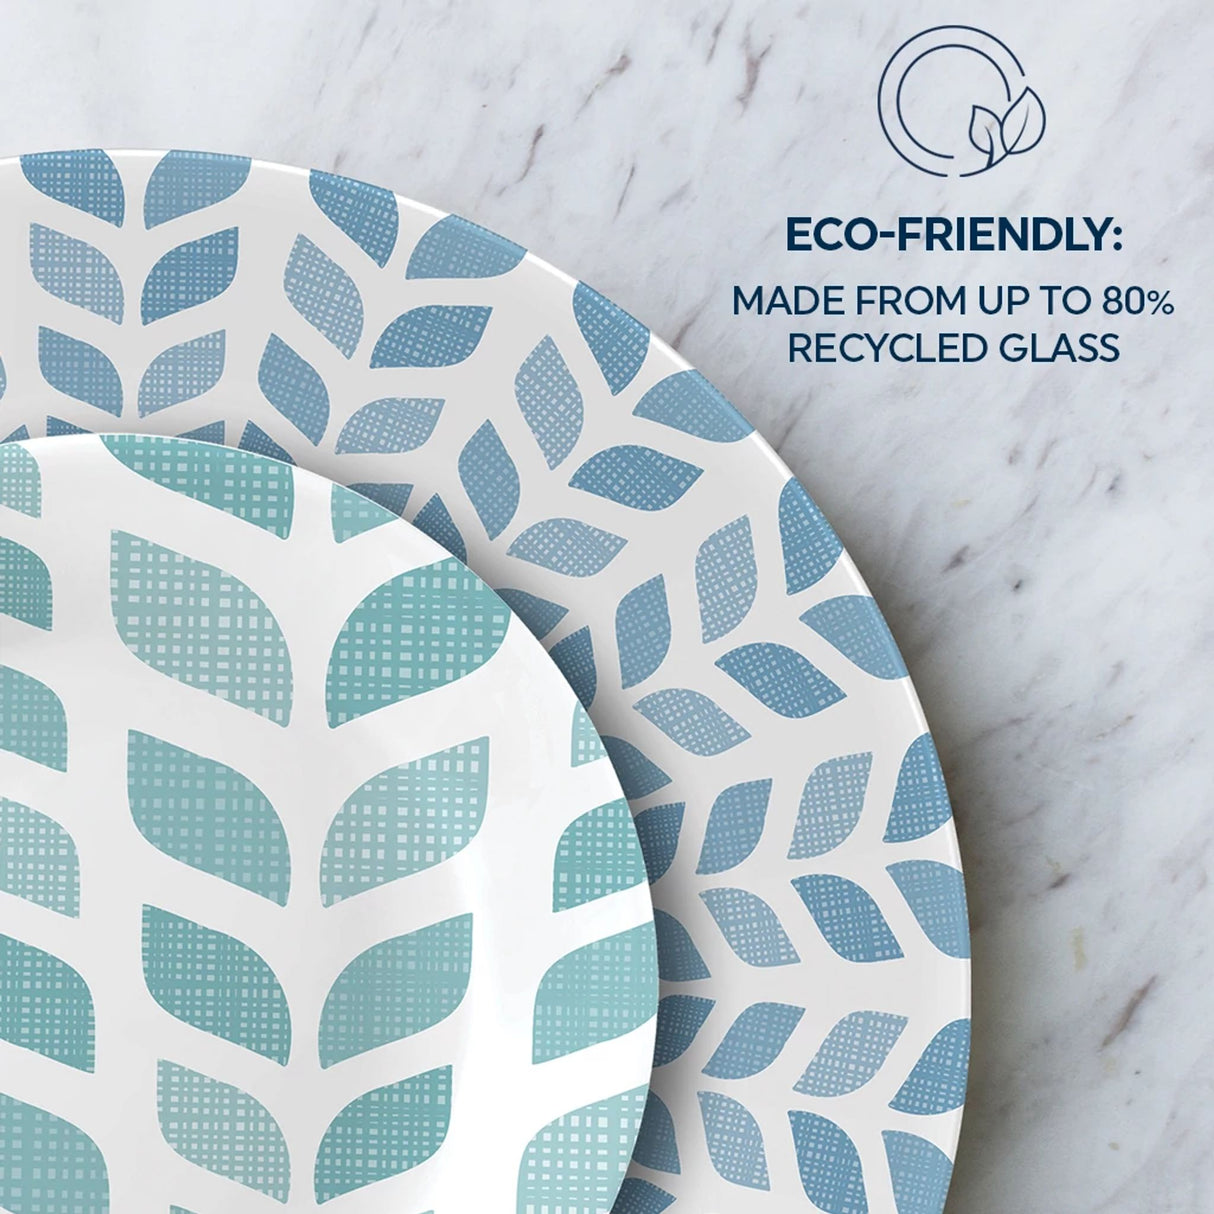  Northern Pines Dinner &amp; Appetizer plates with text eco-friendly made from up to 80% recycled glass